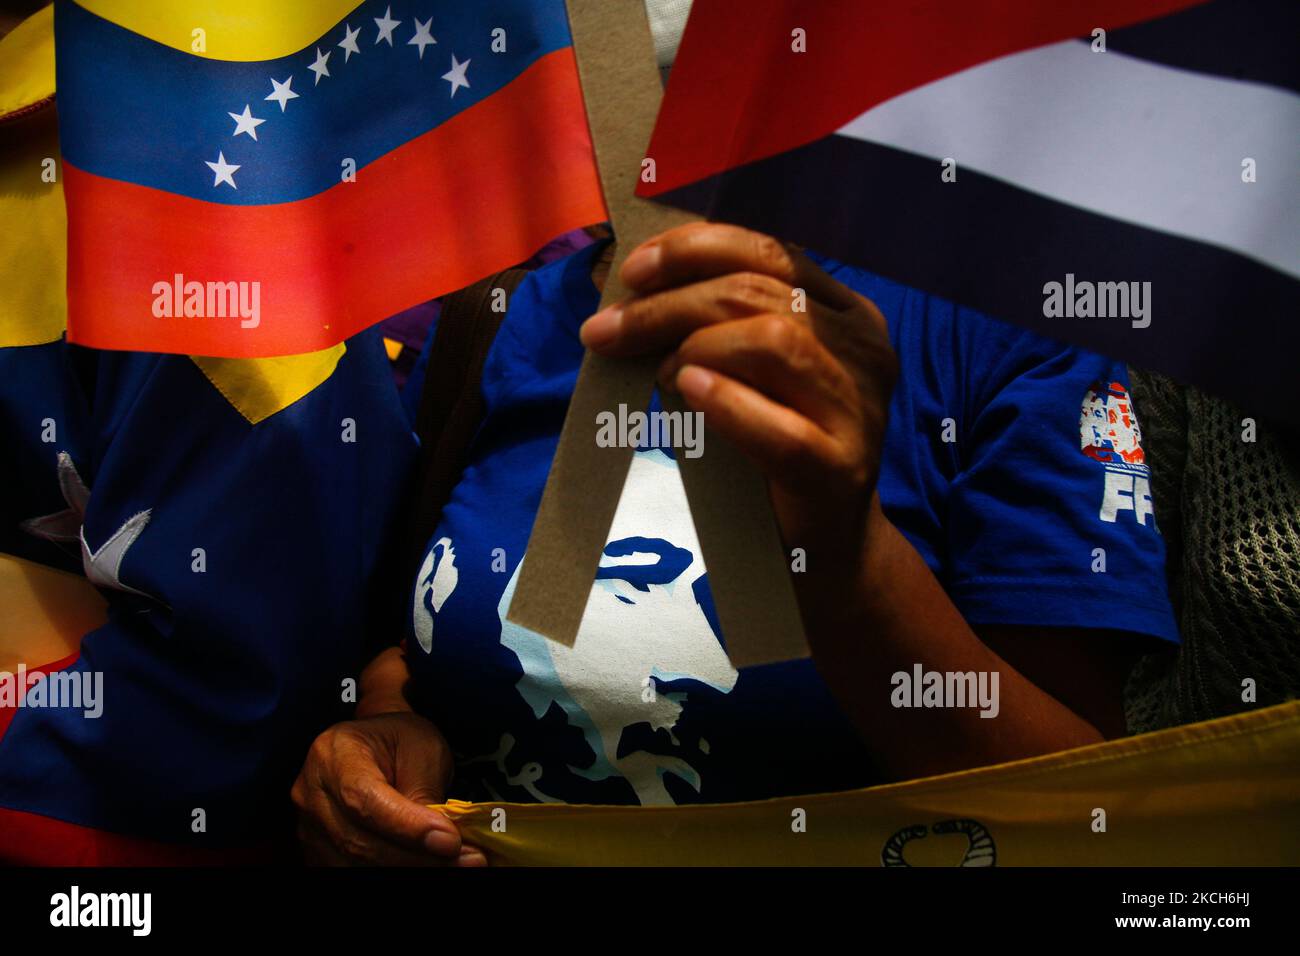 A woman wearing an Ernesto Che Guevara shirt takes part in a rally in support with the Cuban government and its supporters, in front of the embassy in Caracas, Venezuela on July 12, 2021 (Photo by Javier Campos/NurPhoto) Stock Photo